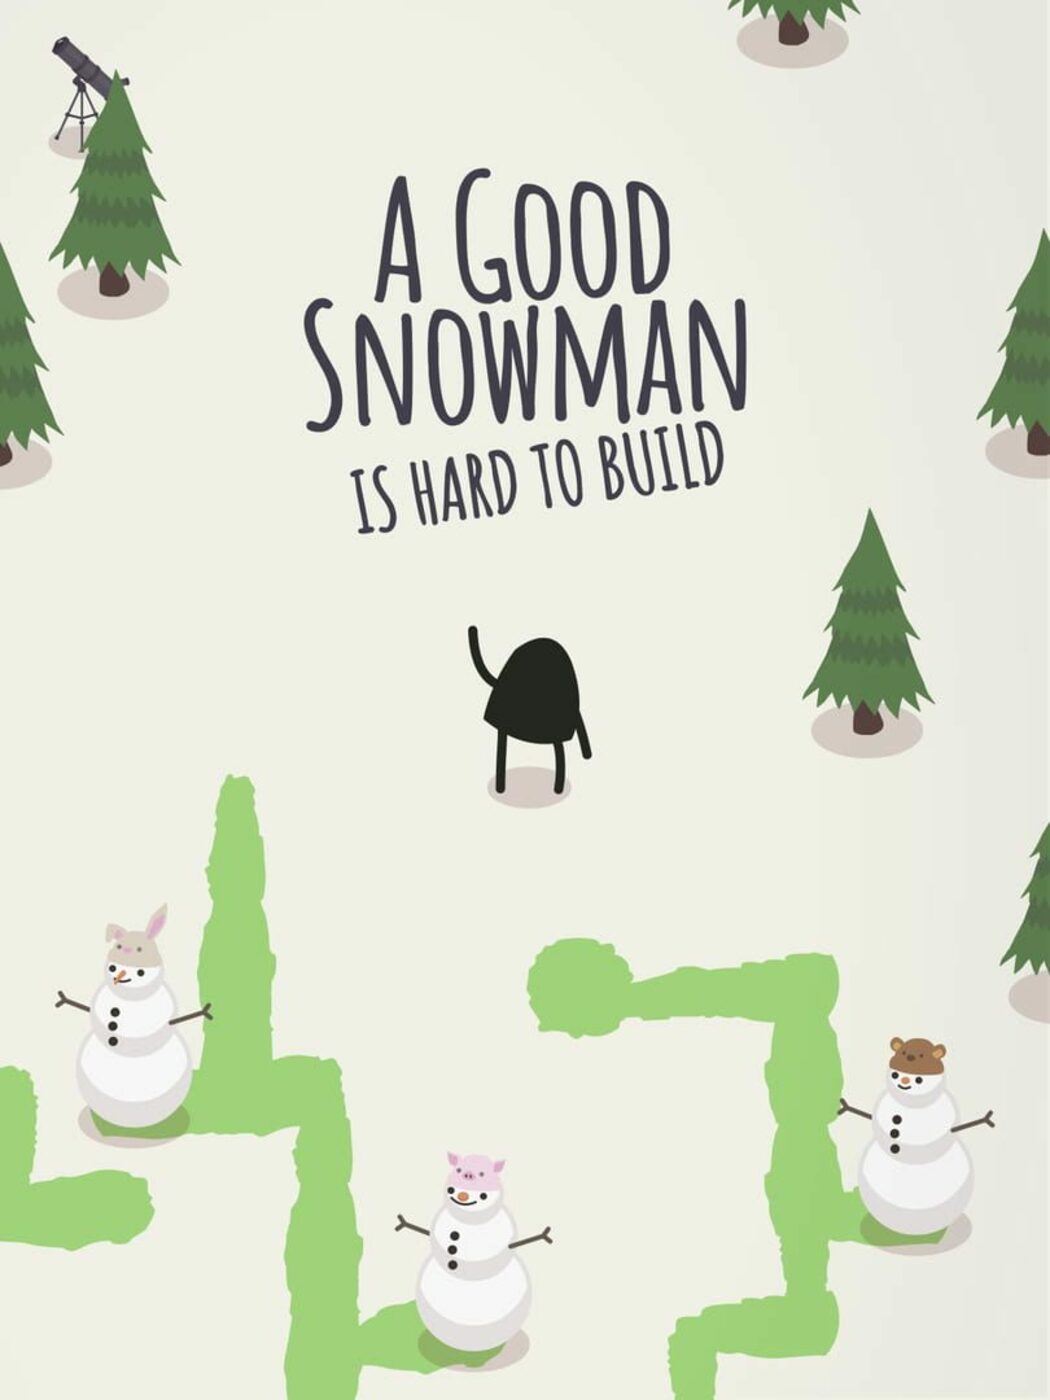 A good snowman is hard to build